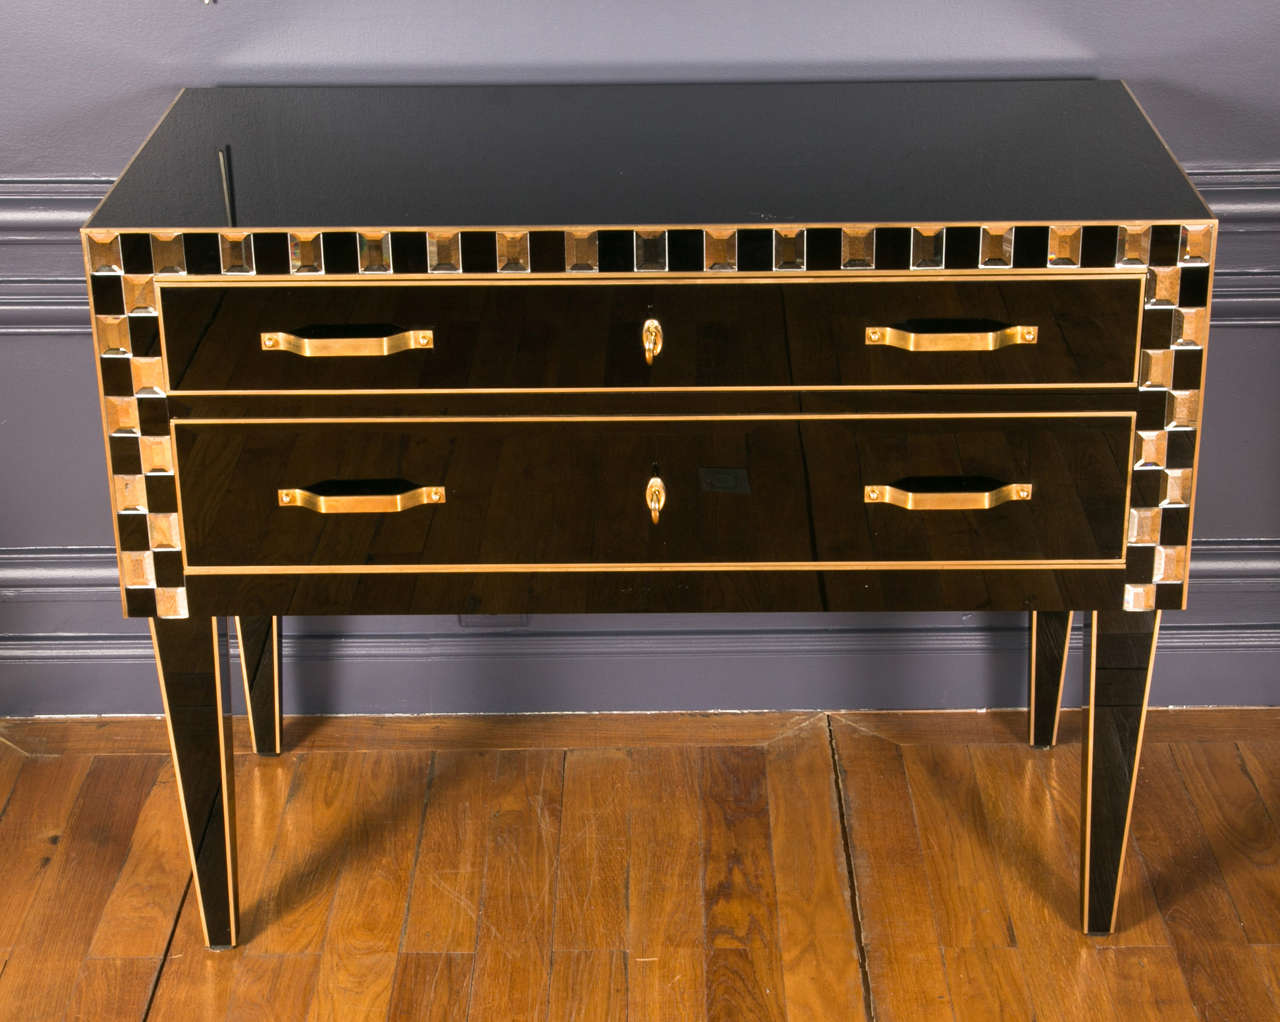 commodes in brass and black mirror, two drawers